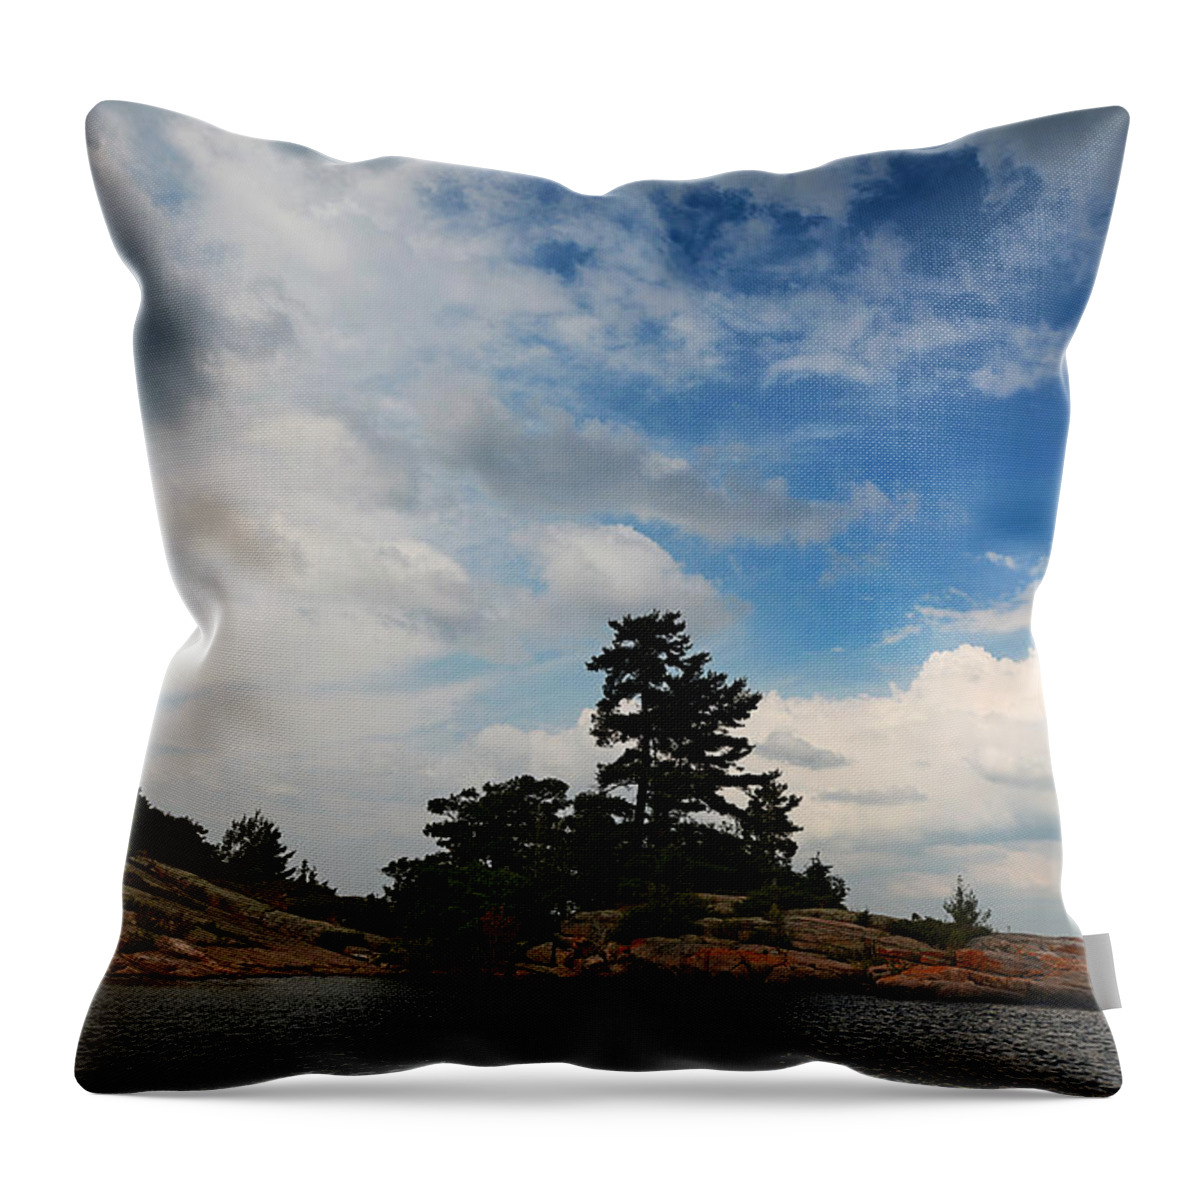 Wall Island Throw Pillow featuring the photograph Wall Island Big Sky 3627 by Steve Somerville